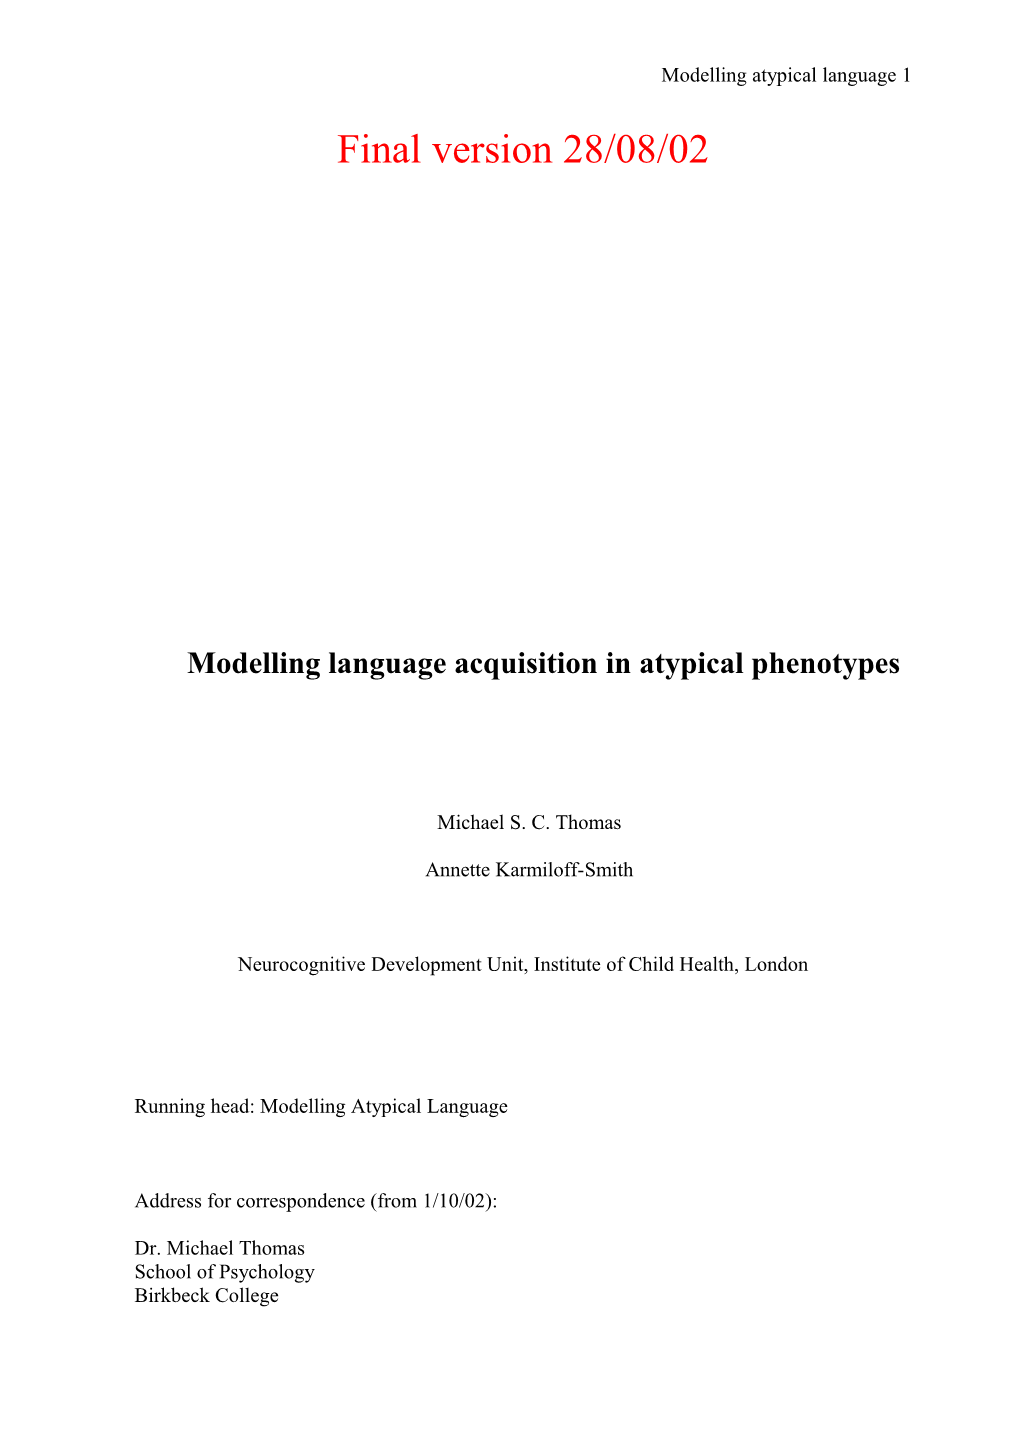 Modelling Language Acquisition in Atypical Phenotypes